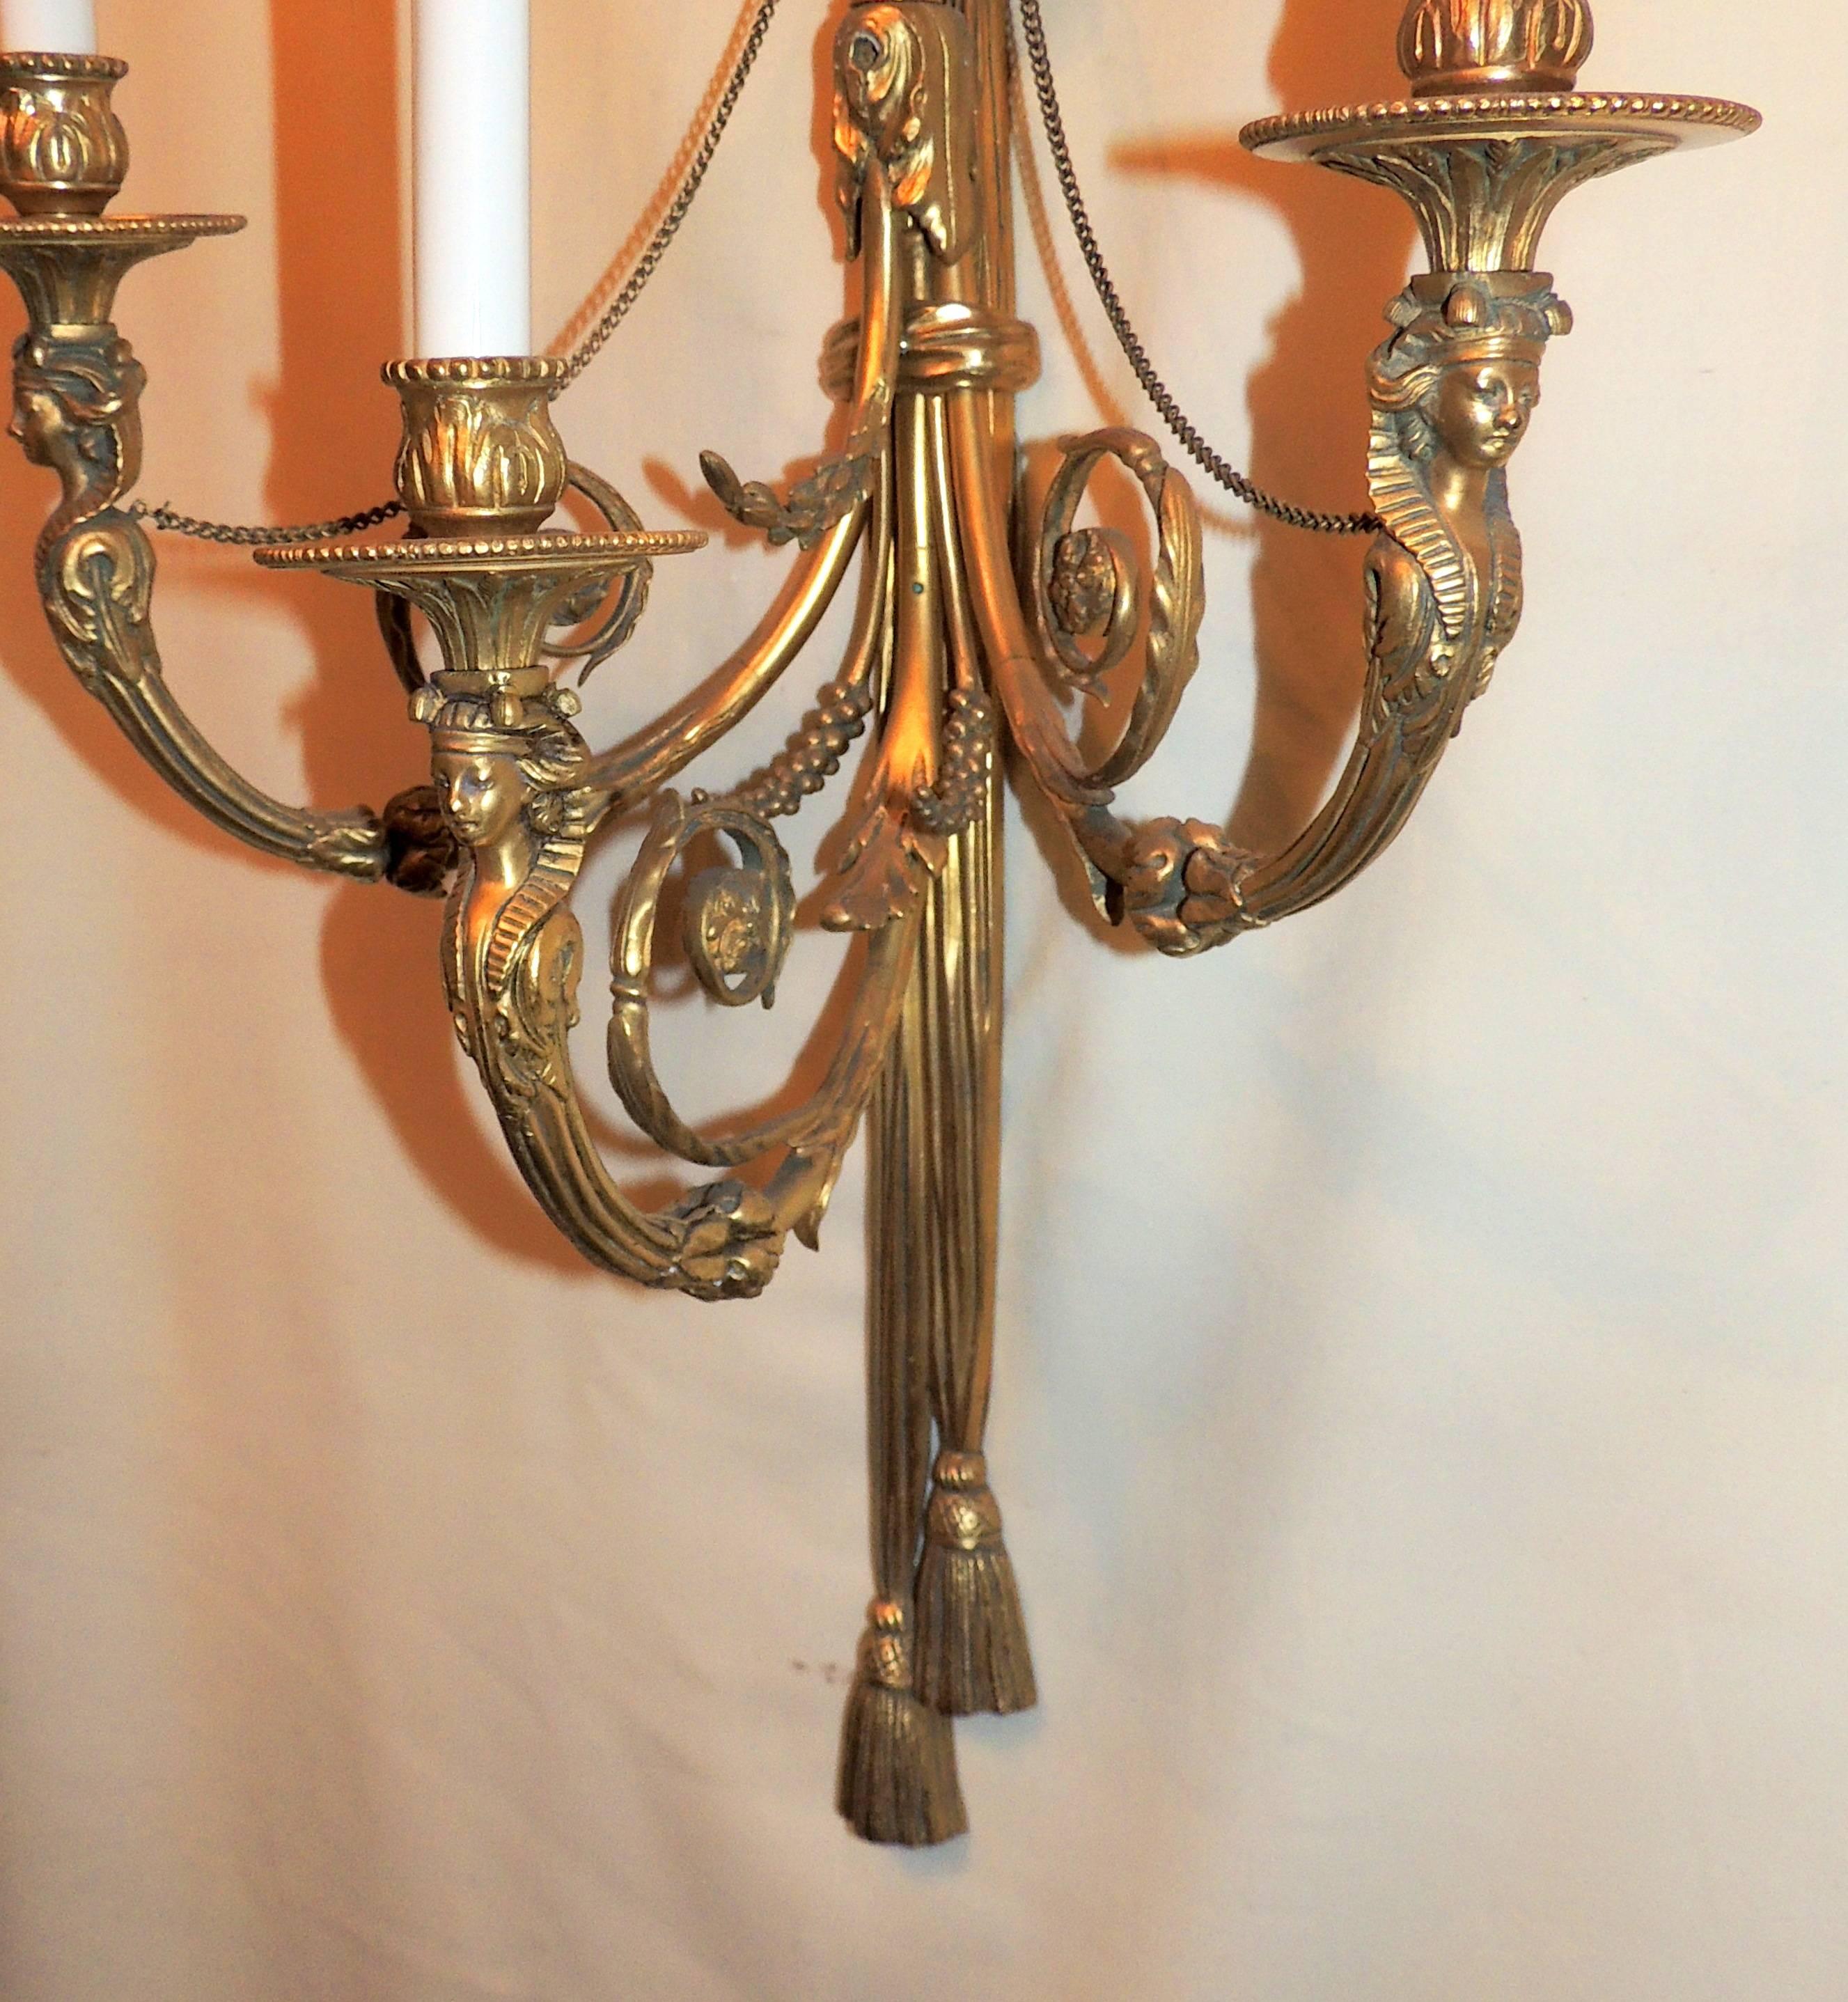 Wonderful Pair of French Large Bronze Empire Regency Lady Figural Tassel Sconces In Good Condition For Sale In Roslyn, NY